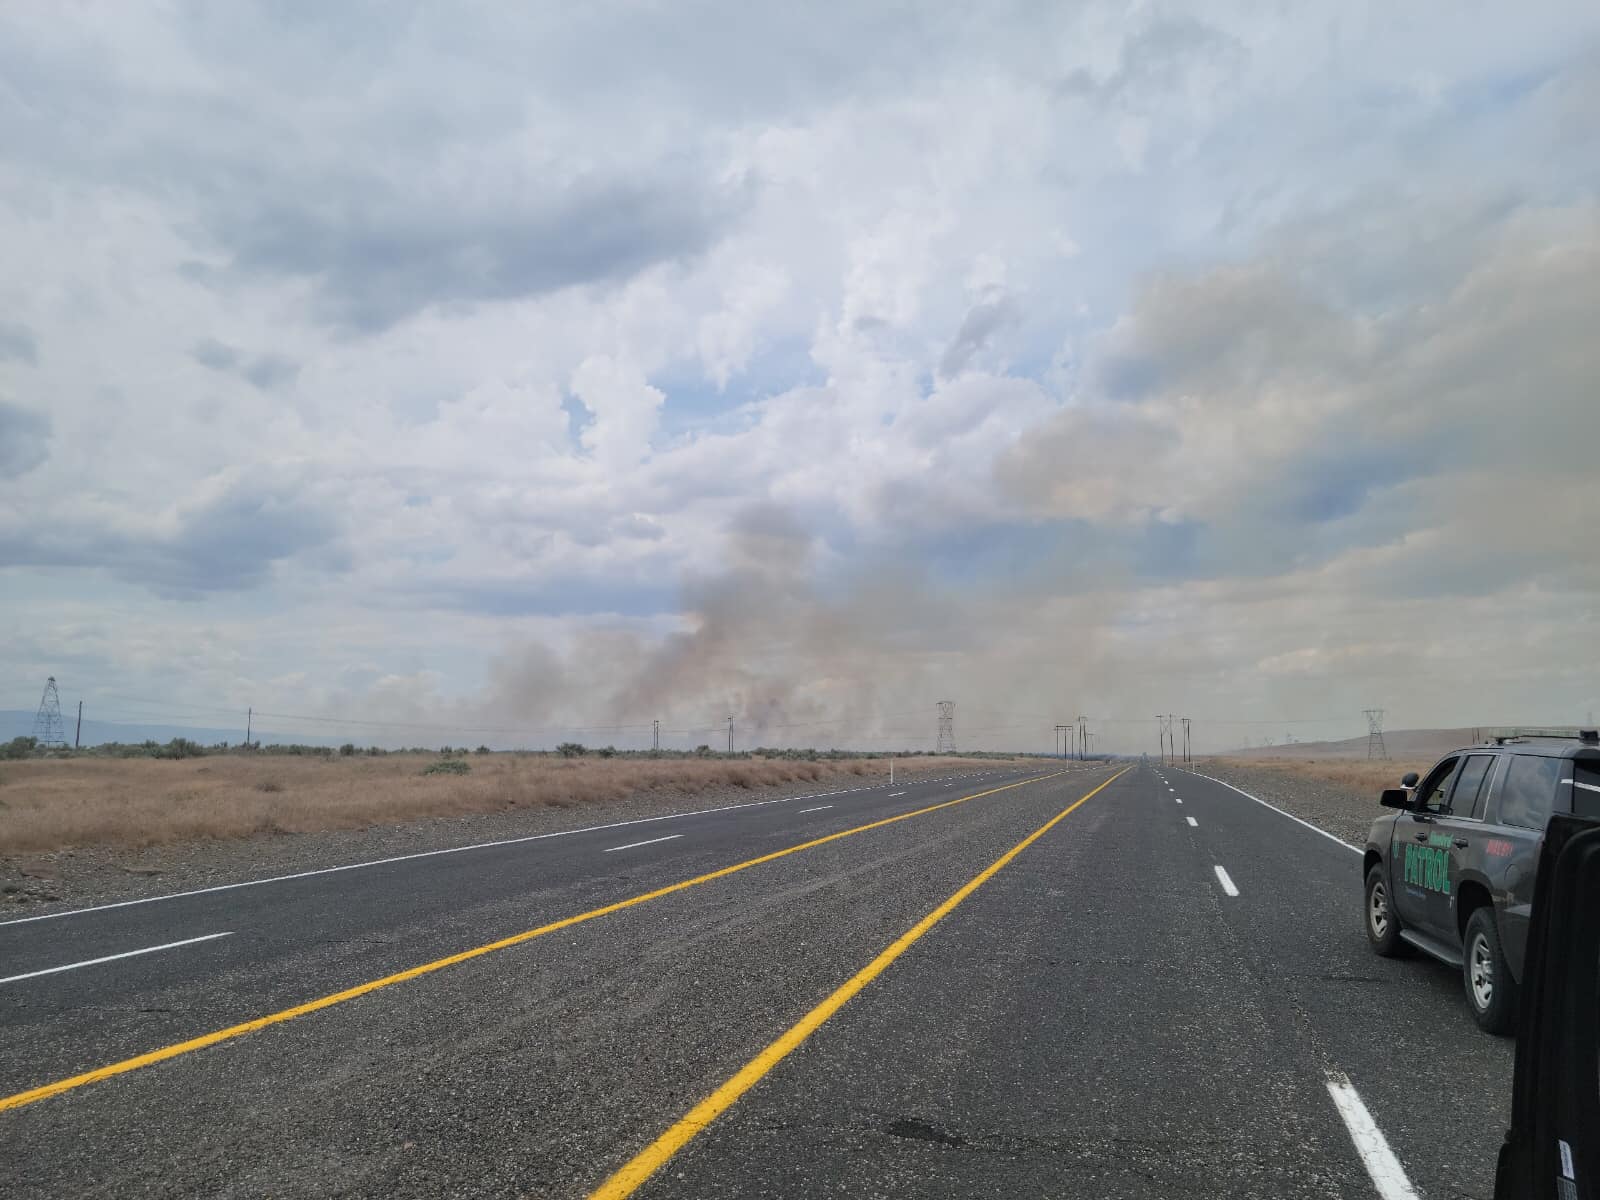 A two-lane road stretches into the distance. It's surrounded by brown dessert landscape on either side. In the background of the picture, a small plume of brown smoke rises into blue, cloudy skies.